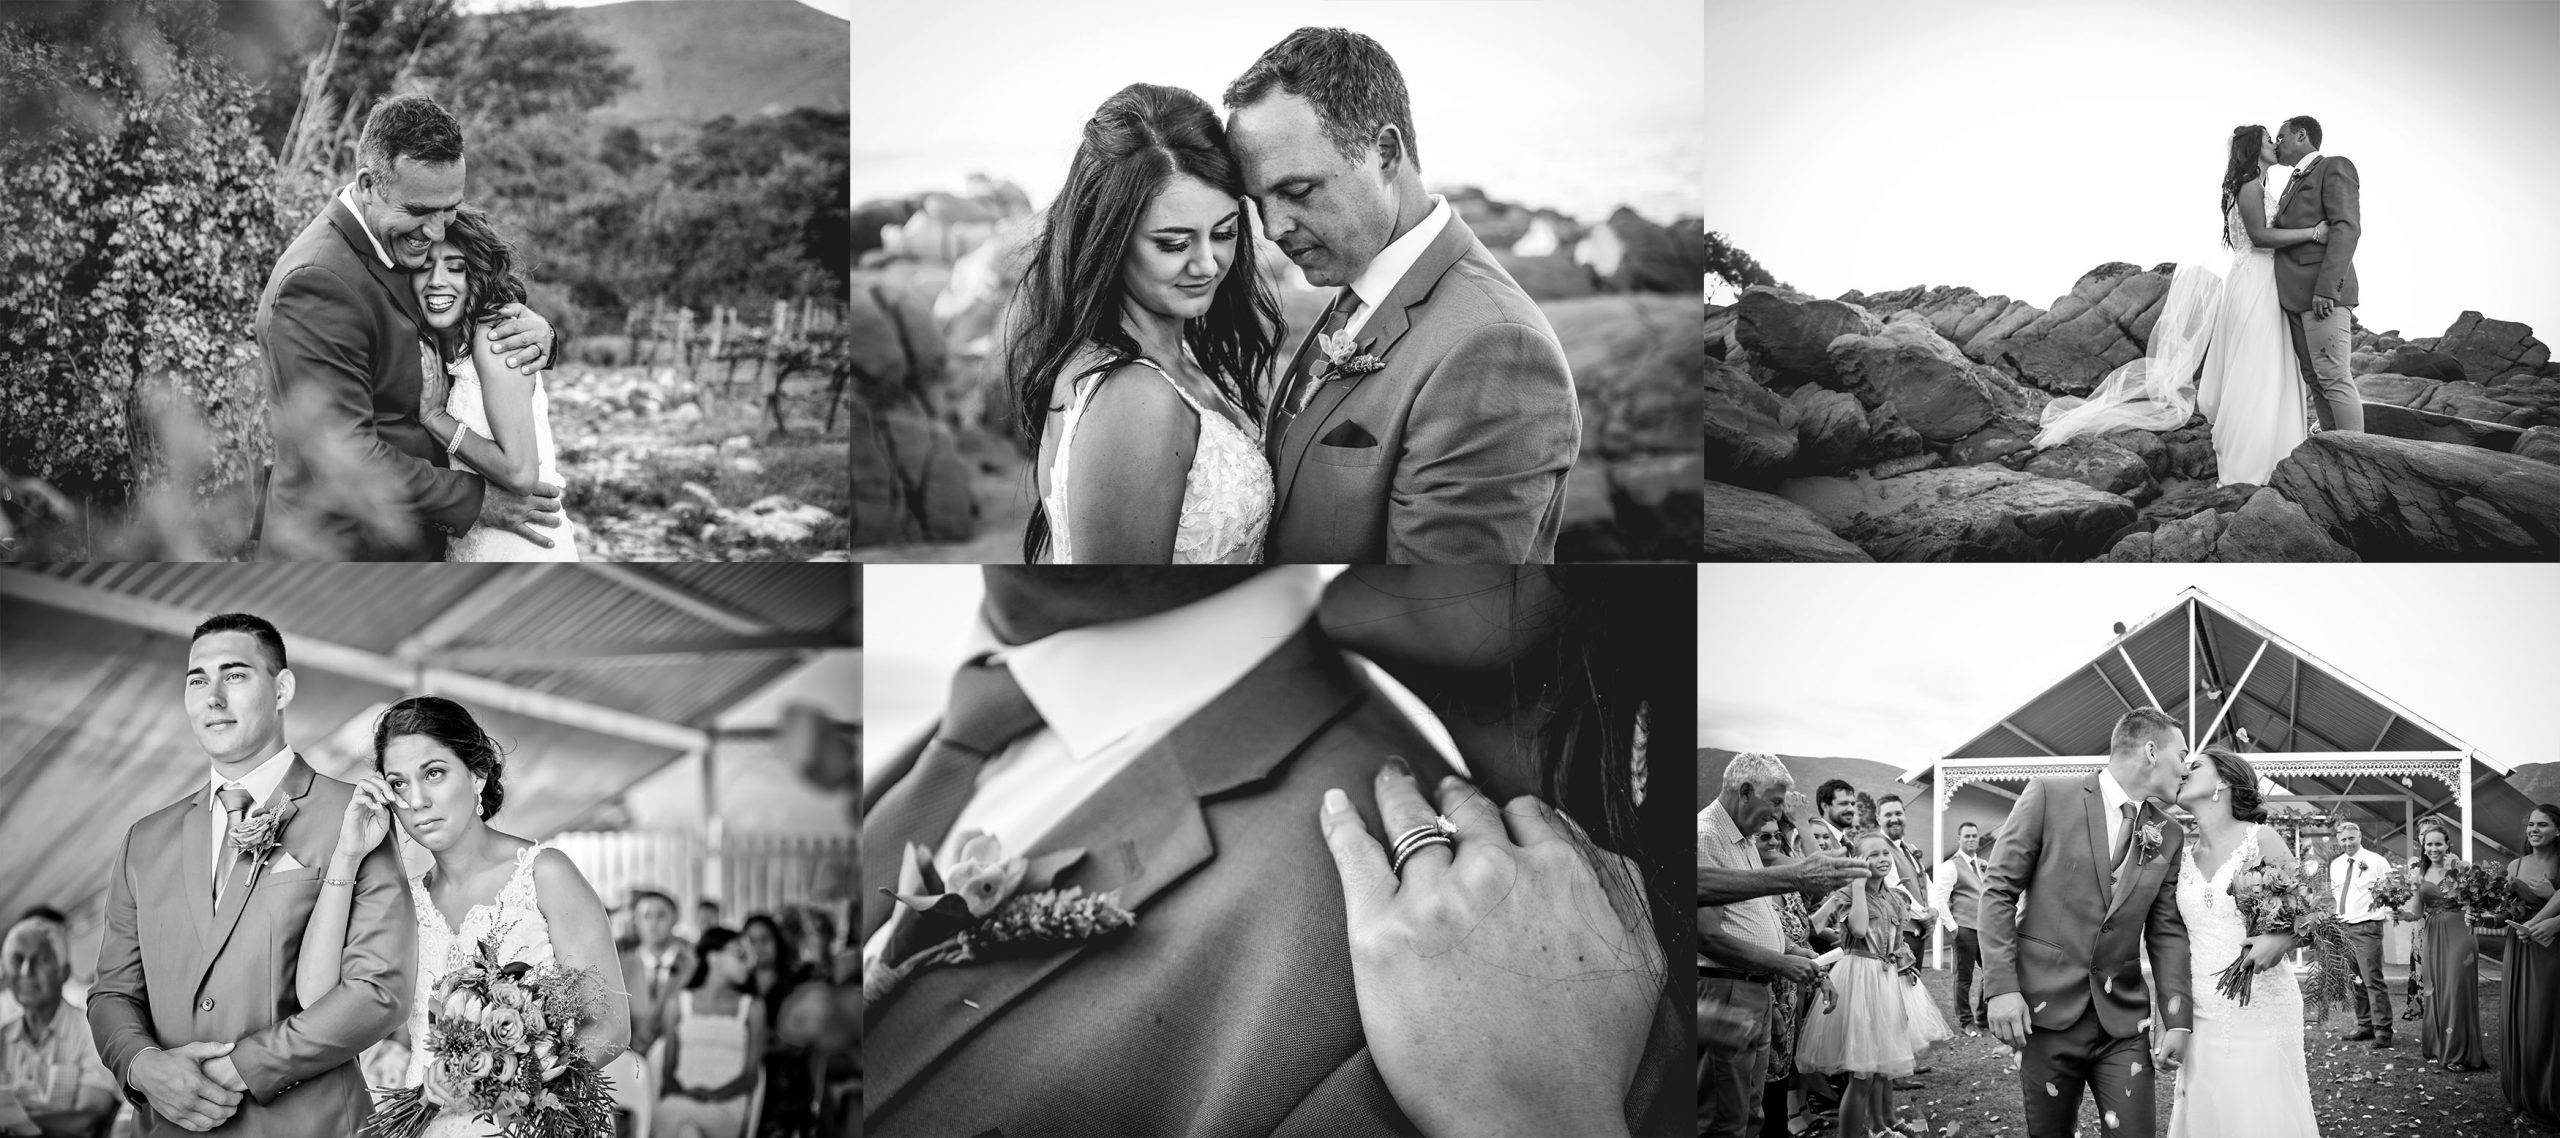 Oudtshoorn wedding photography
Modern Black and White images.
Captures emotion and detail
